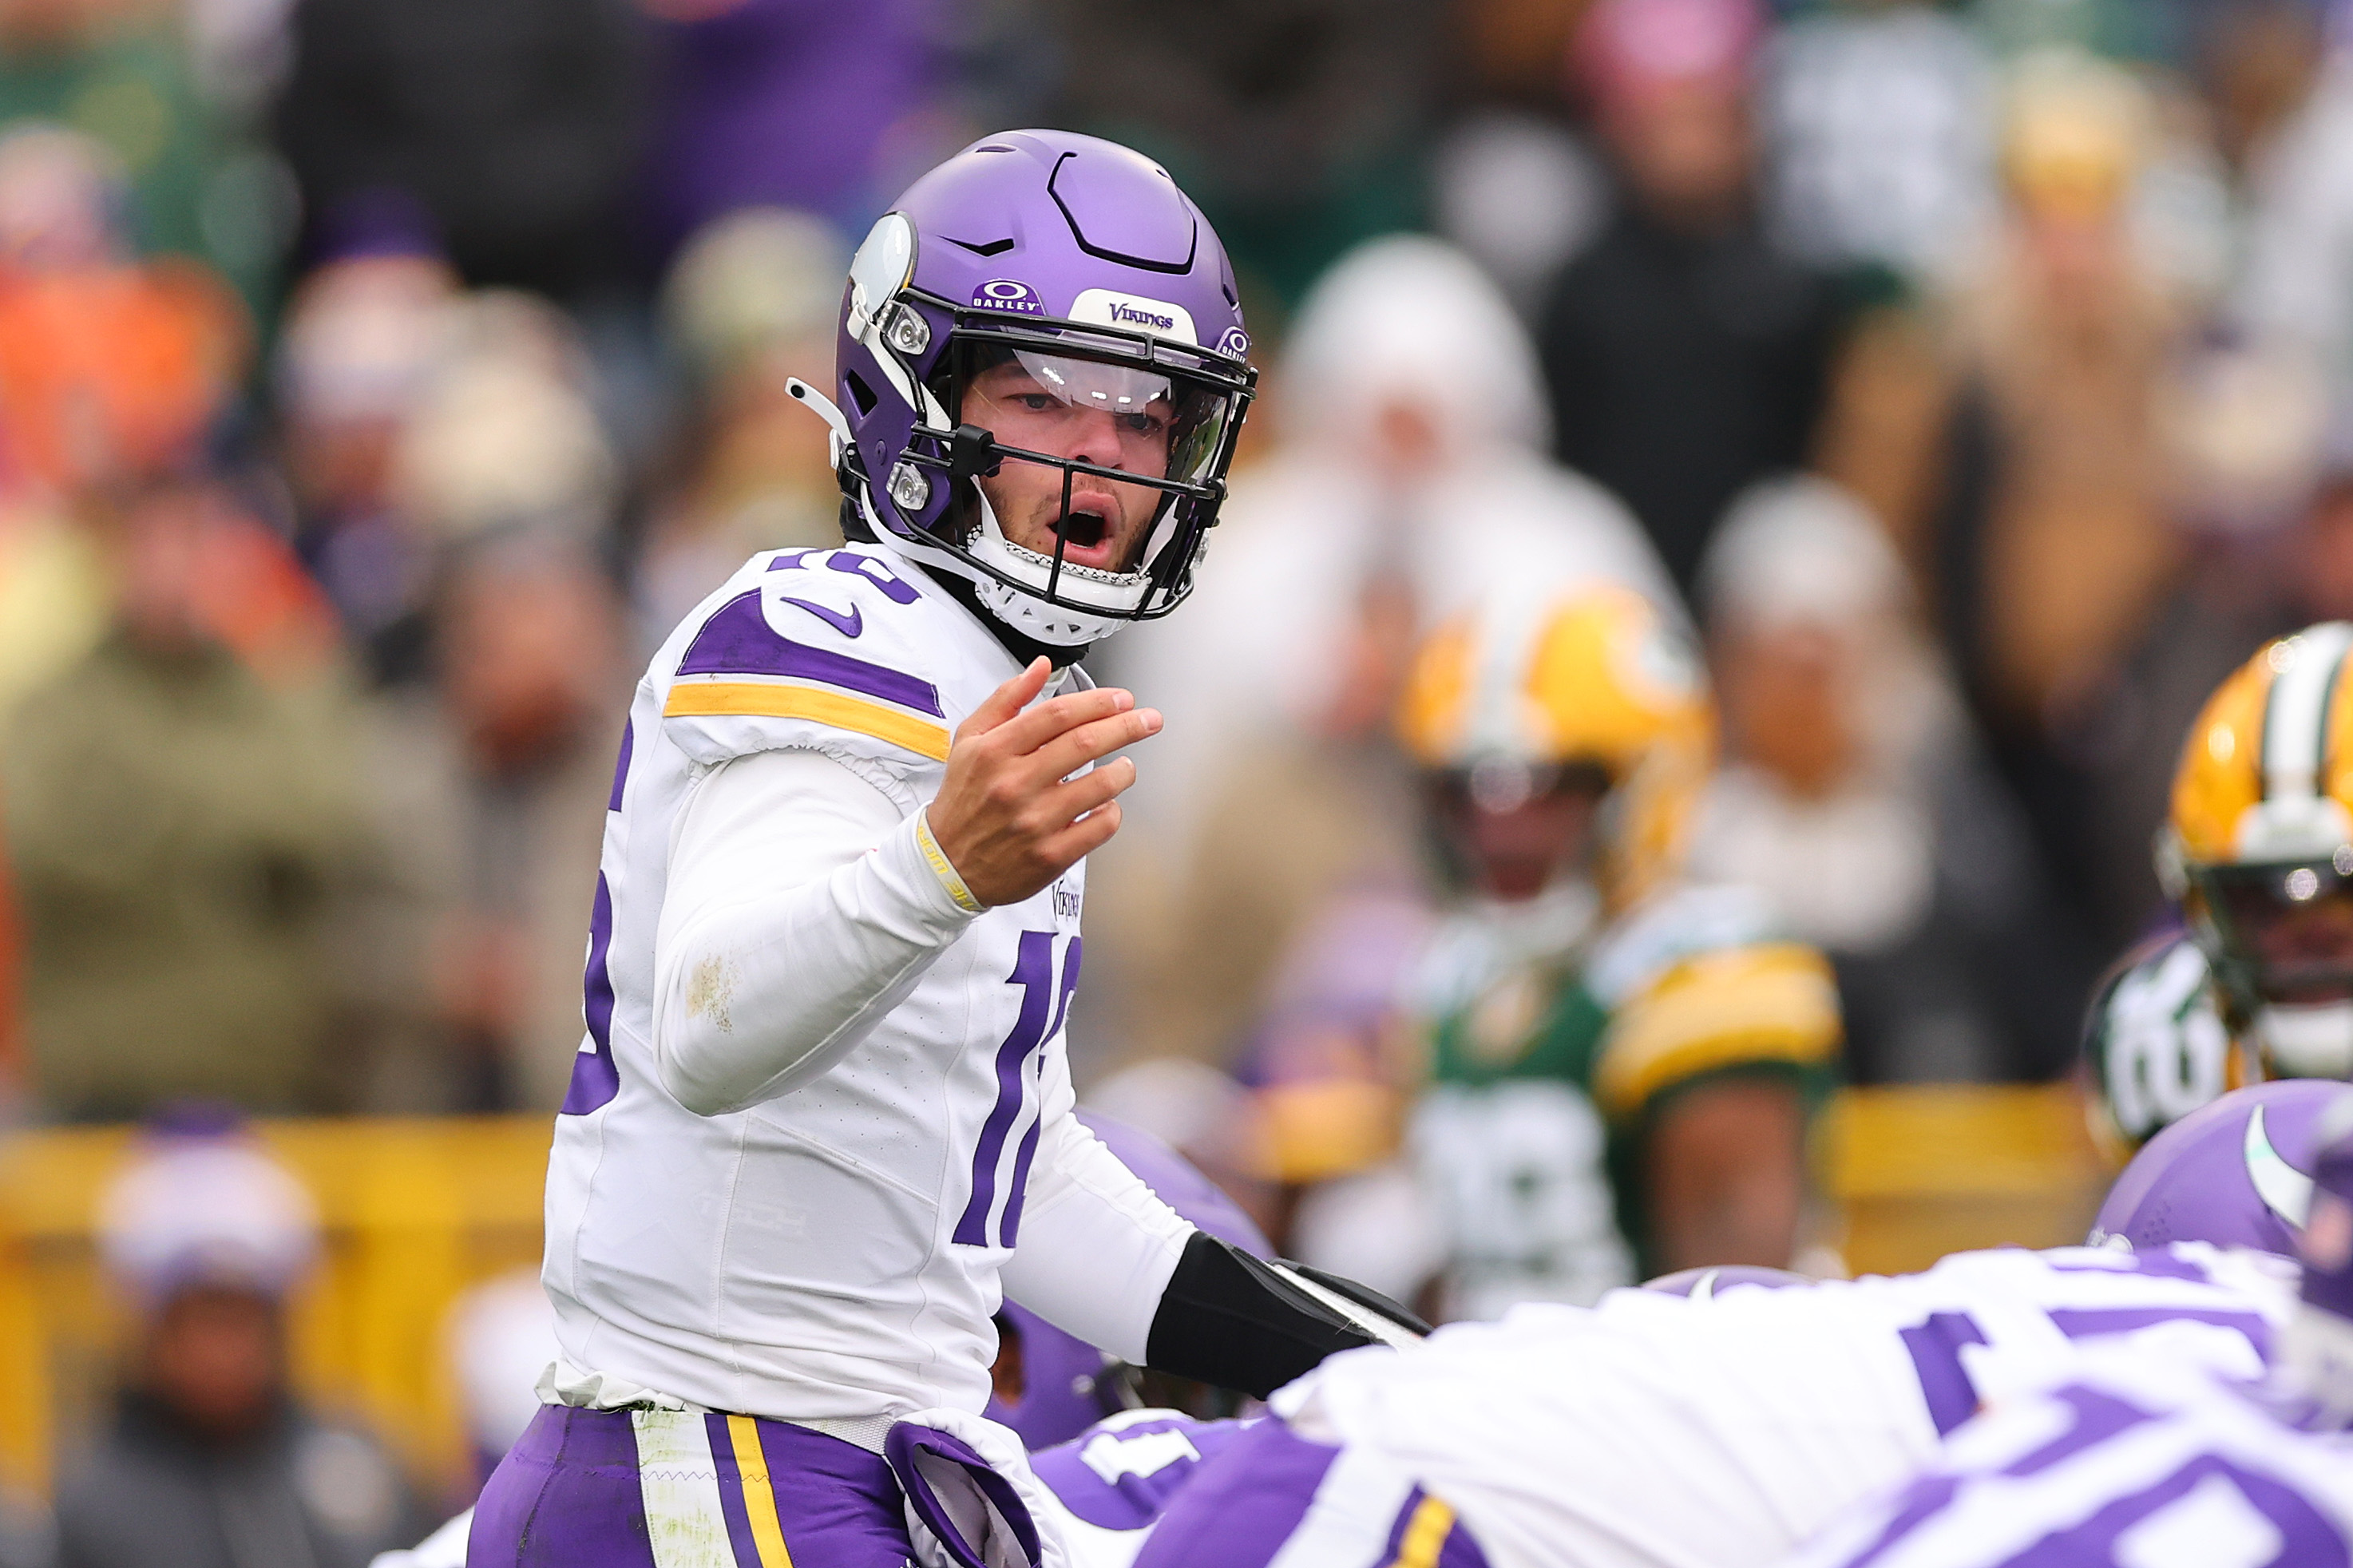 What to watch: Vikings Sunday lineup on FOX 9 for season opener on Sept. 13